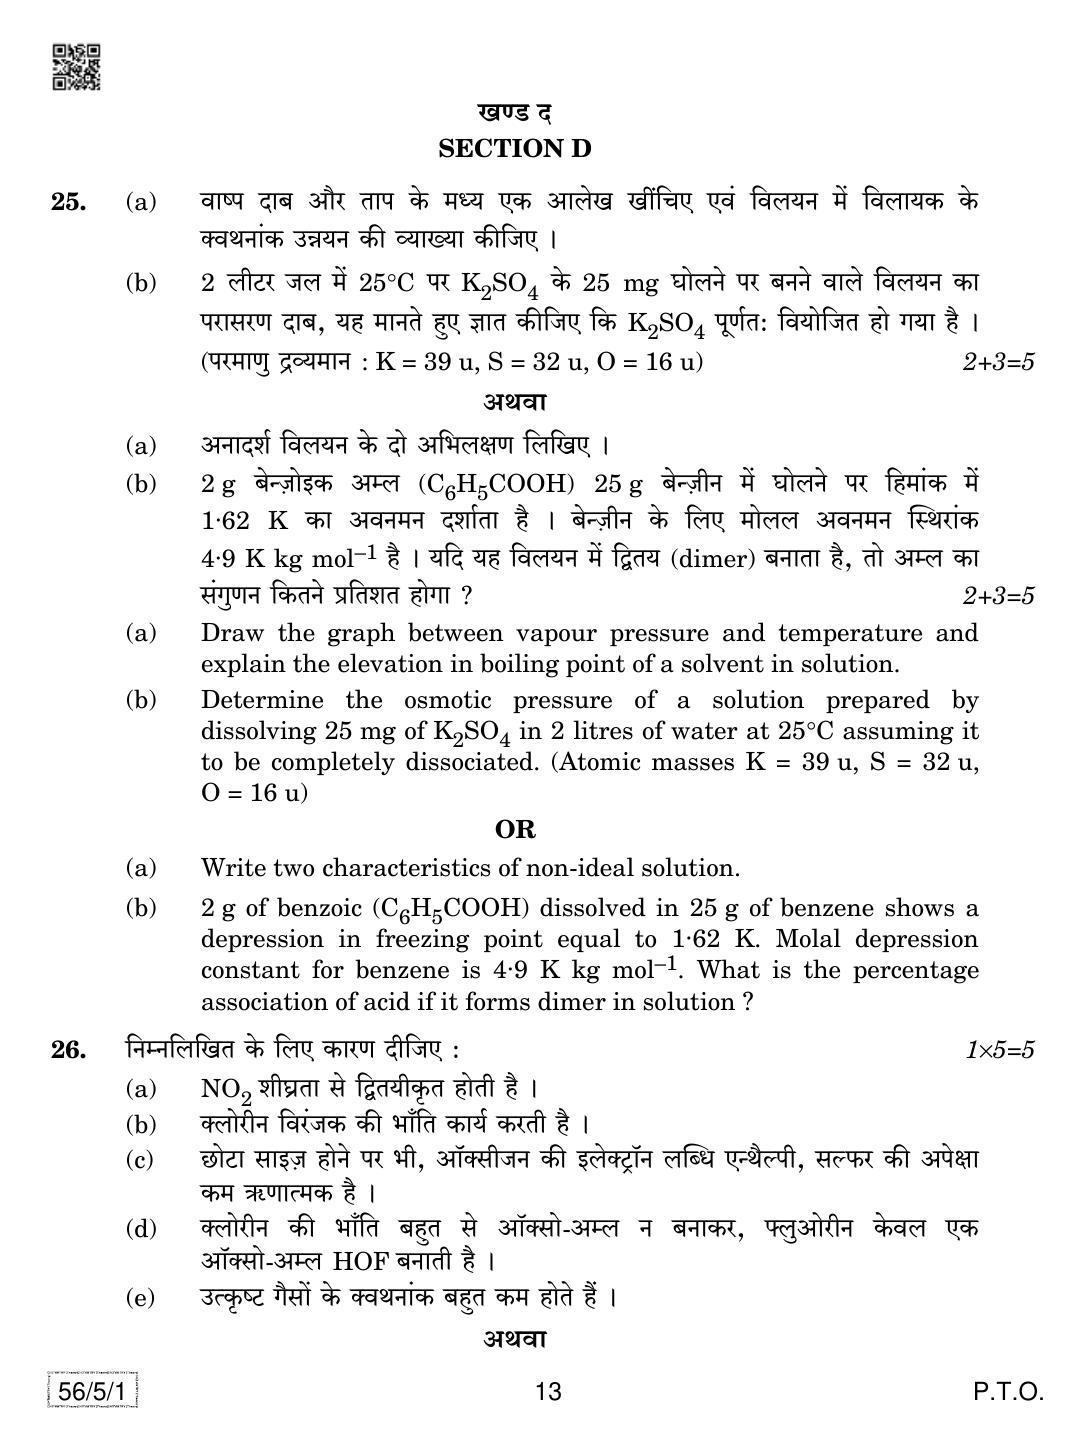 CBSE Class 12 56-5-1 Chemistry 2019 Question Paper - Page 13